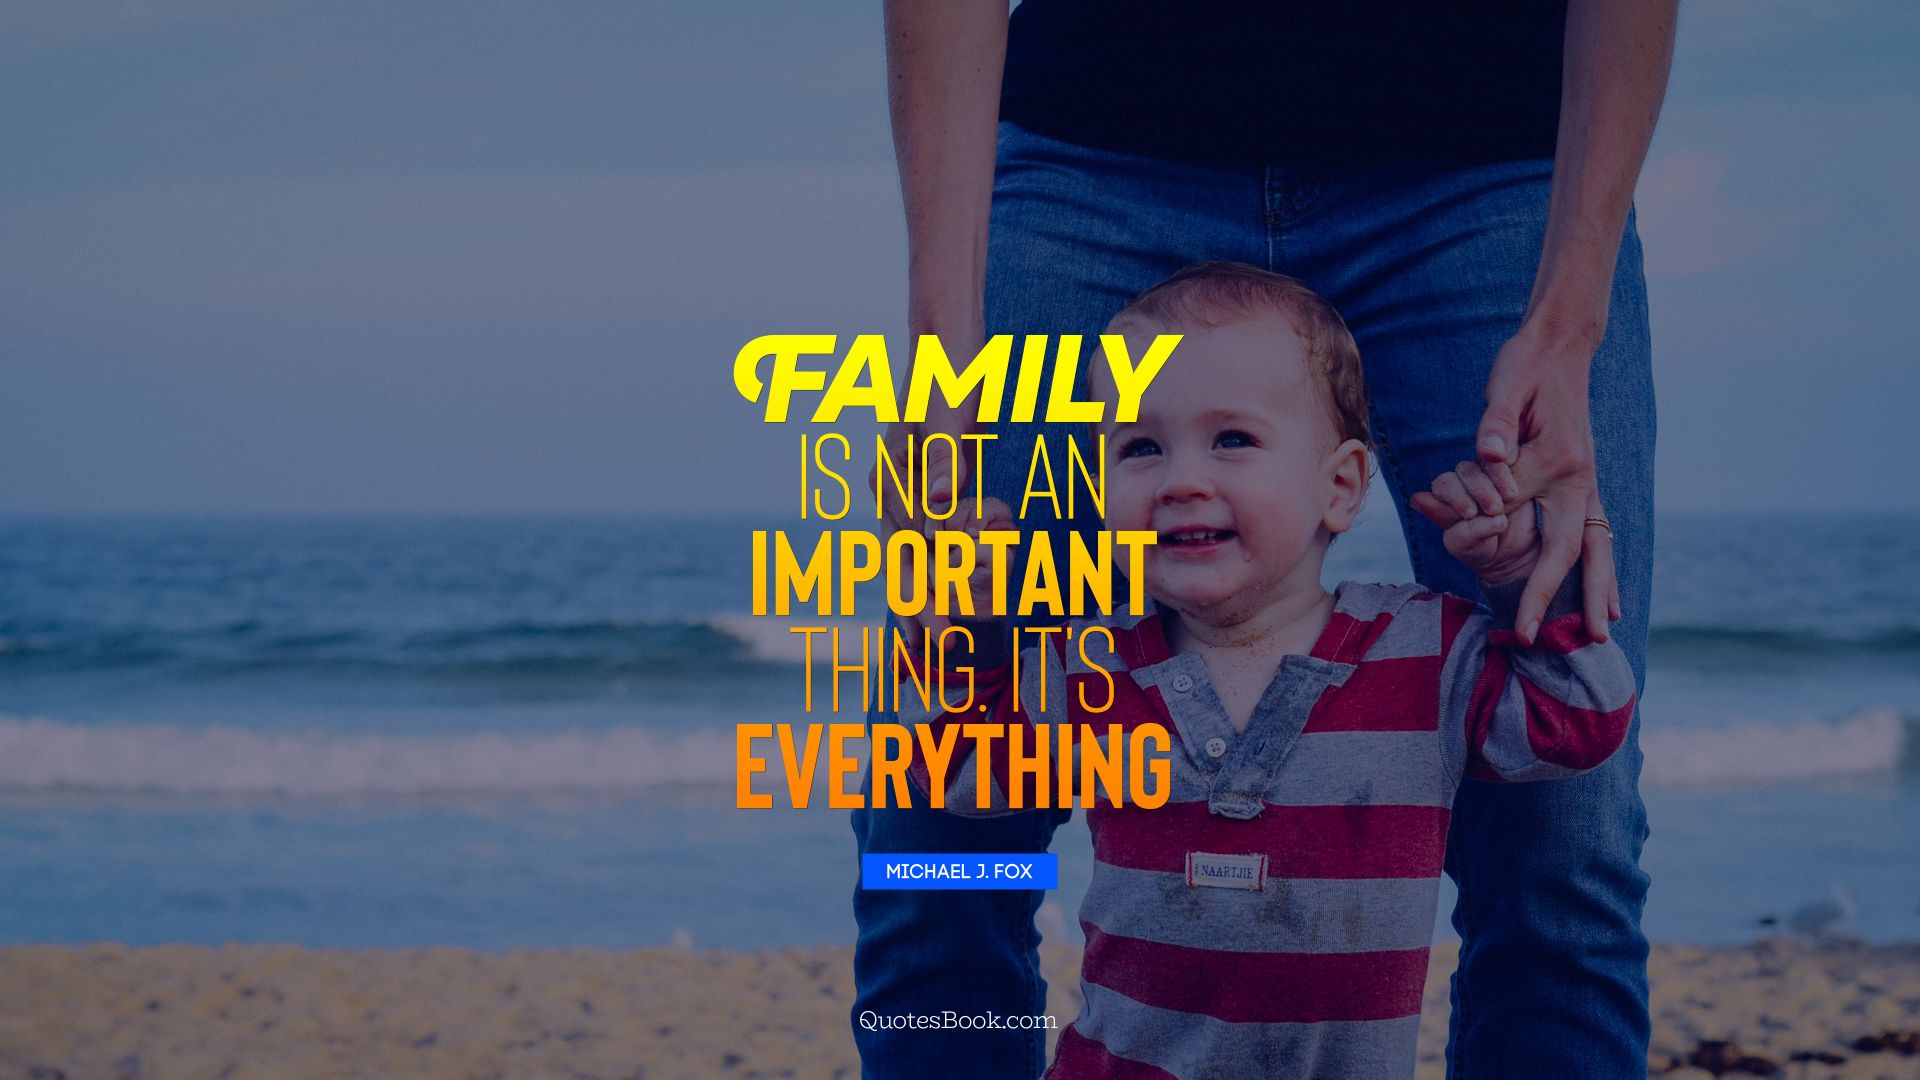 Family is not an important thing. It's everything. - Quote by Michael J. Fox